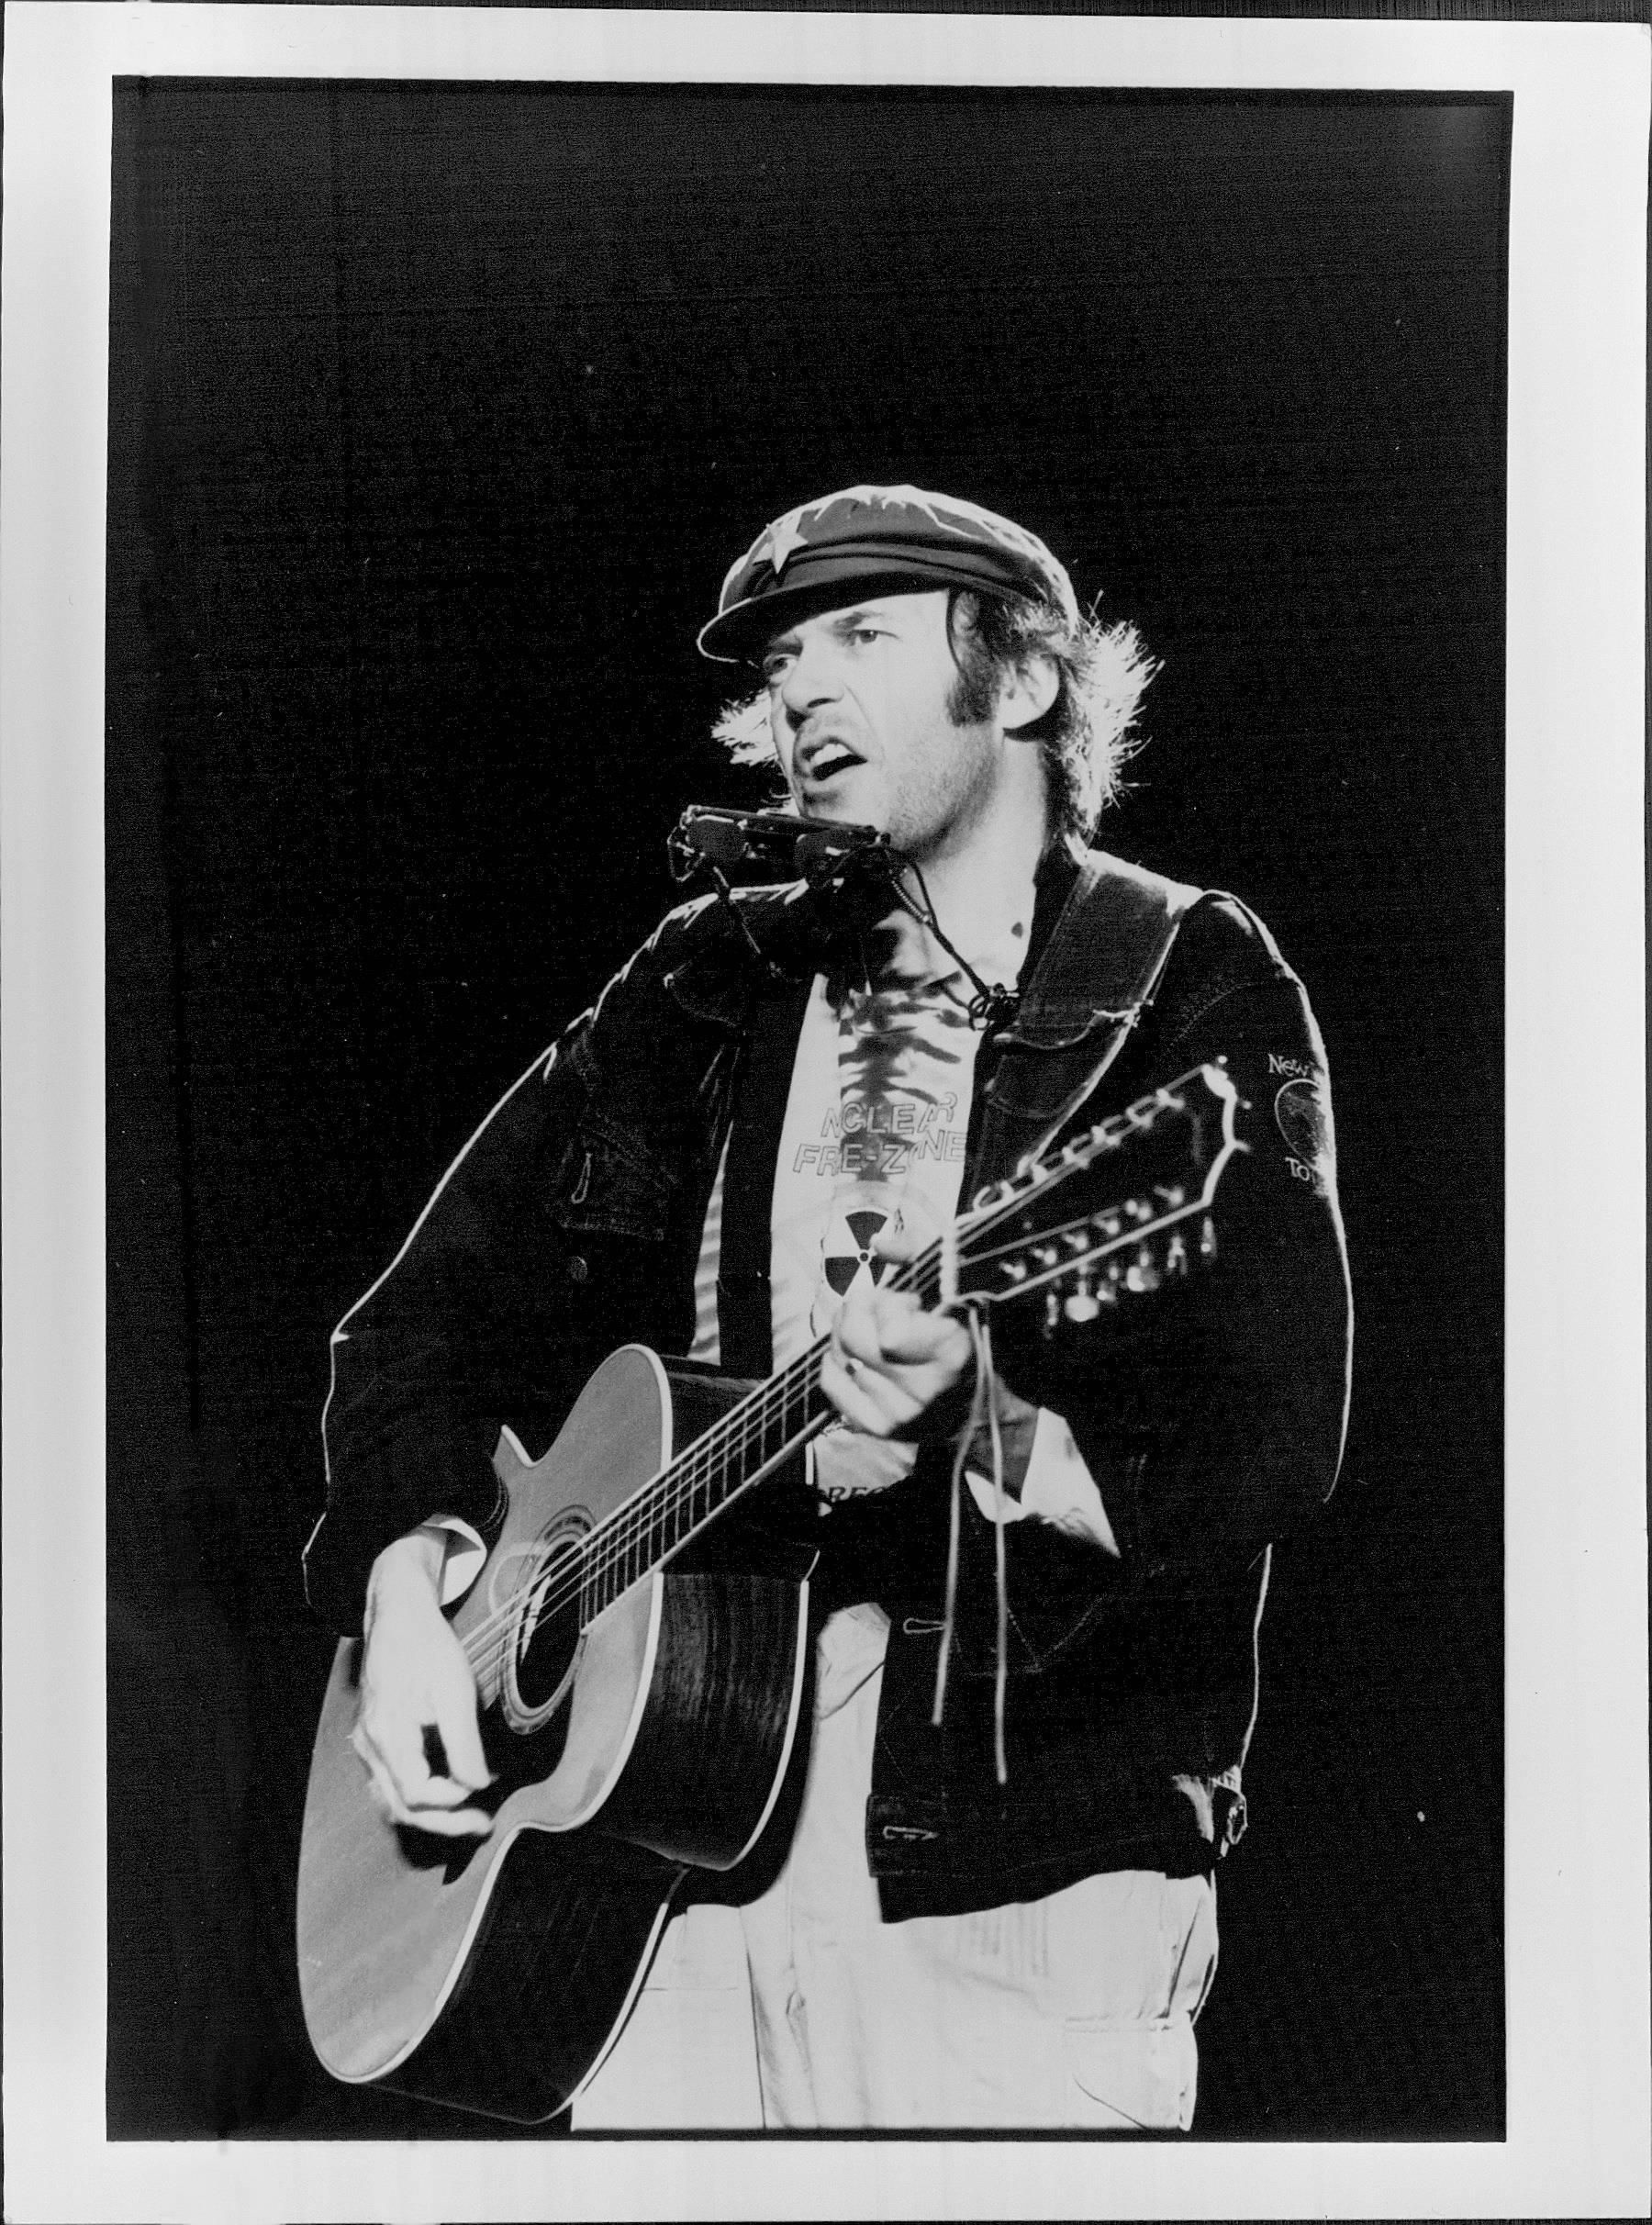 Ebet Roberts Black and White Photograph - Neil Young Playing Guitar in Newsboy Hat Vintage Original Photograph